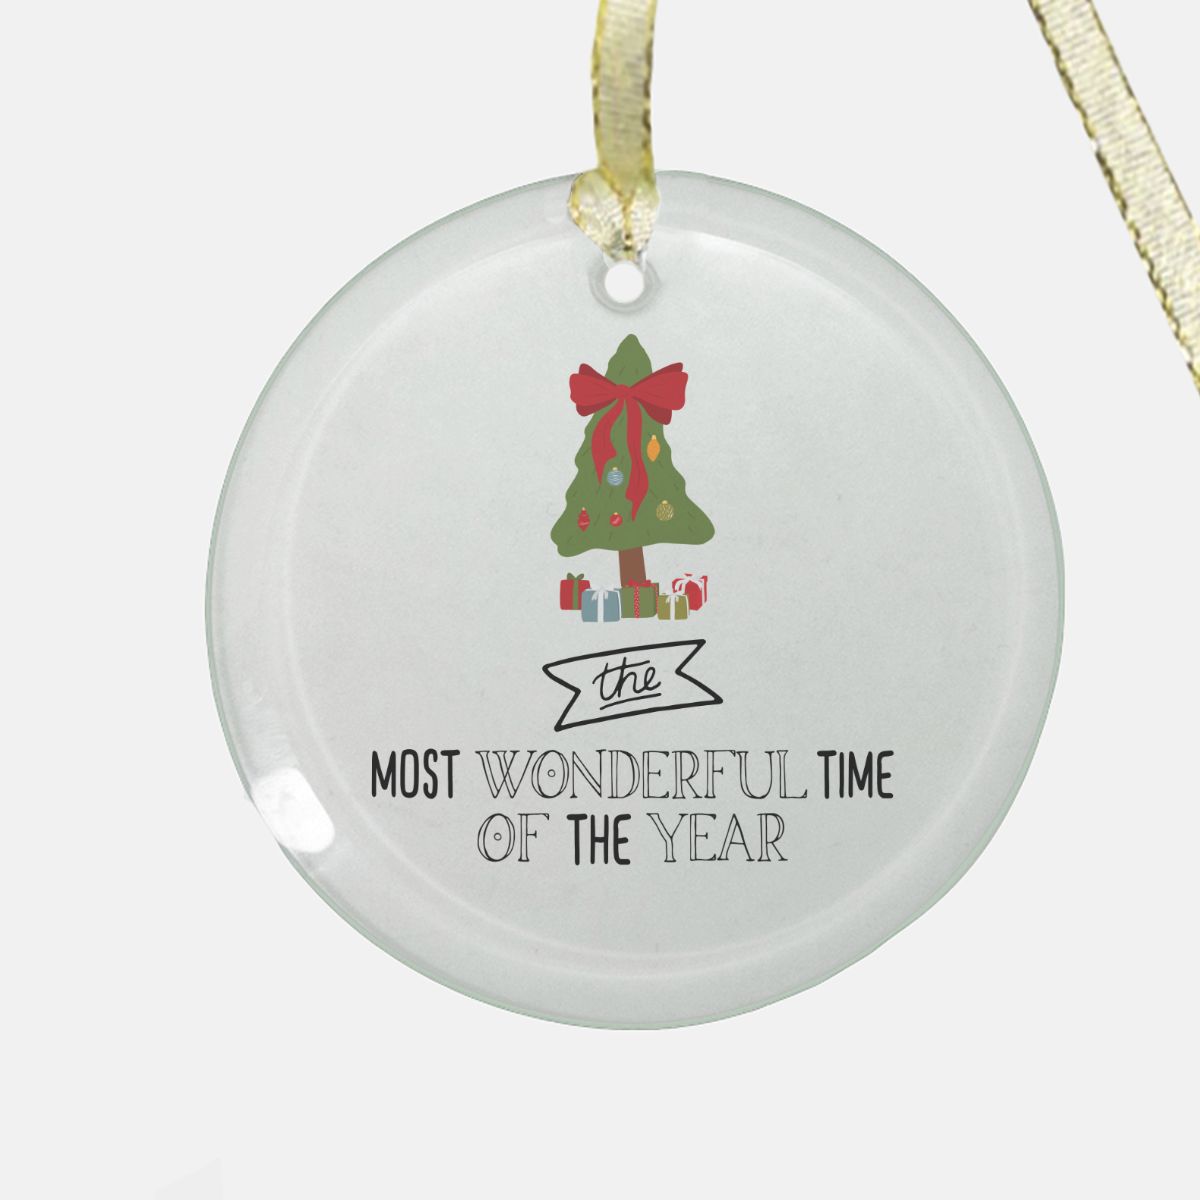 Round Clear Glass Holiday Ornament - Most Wonderful Time